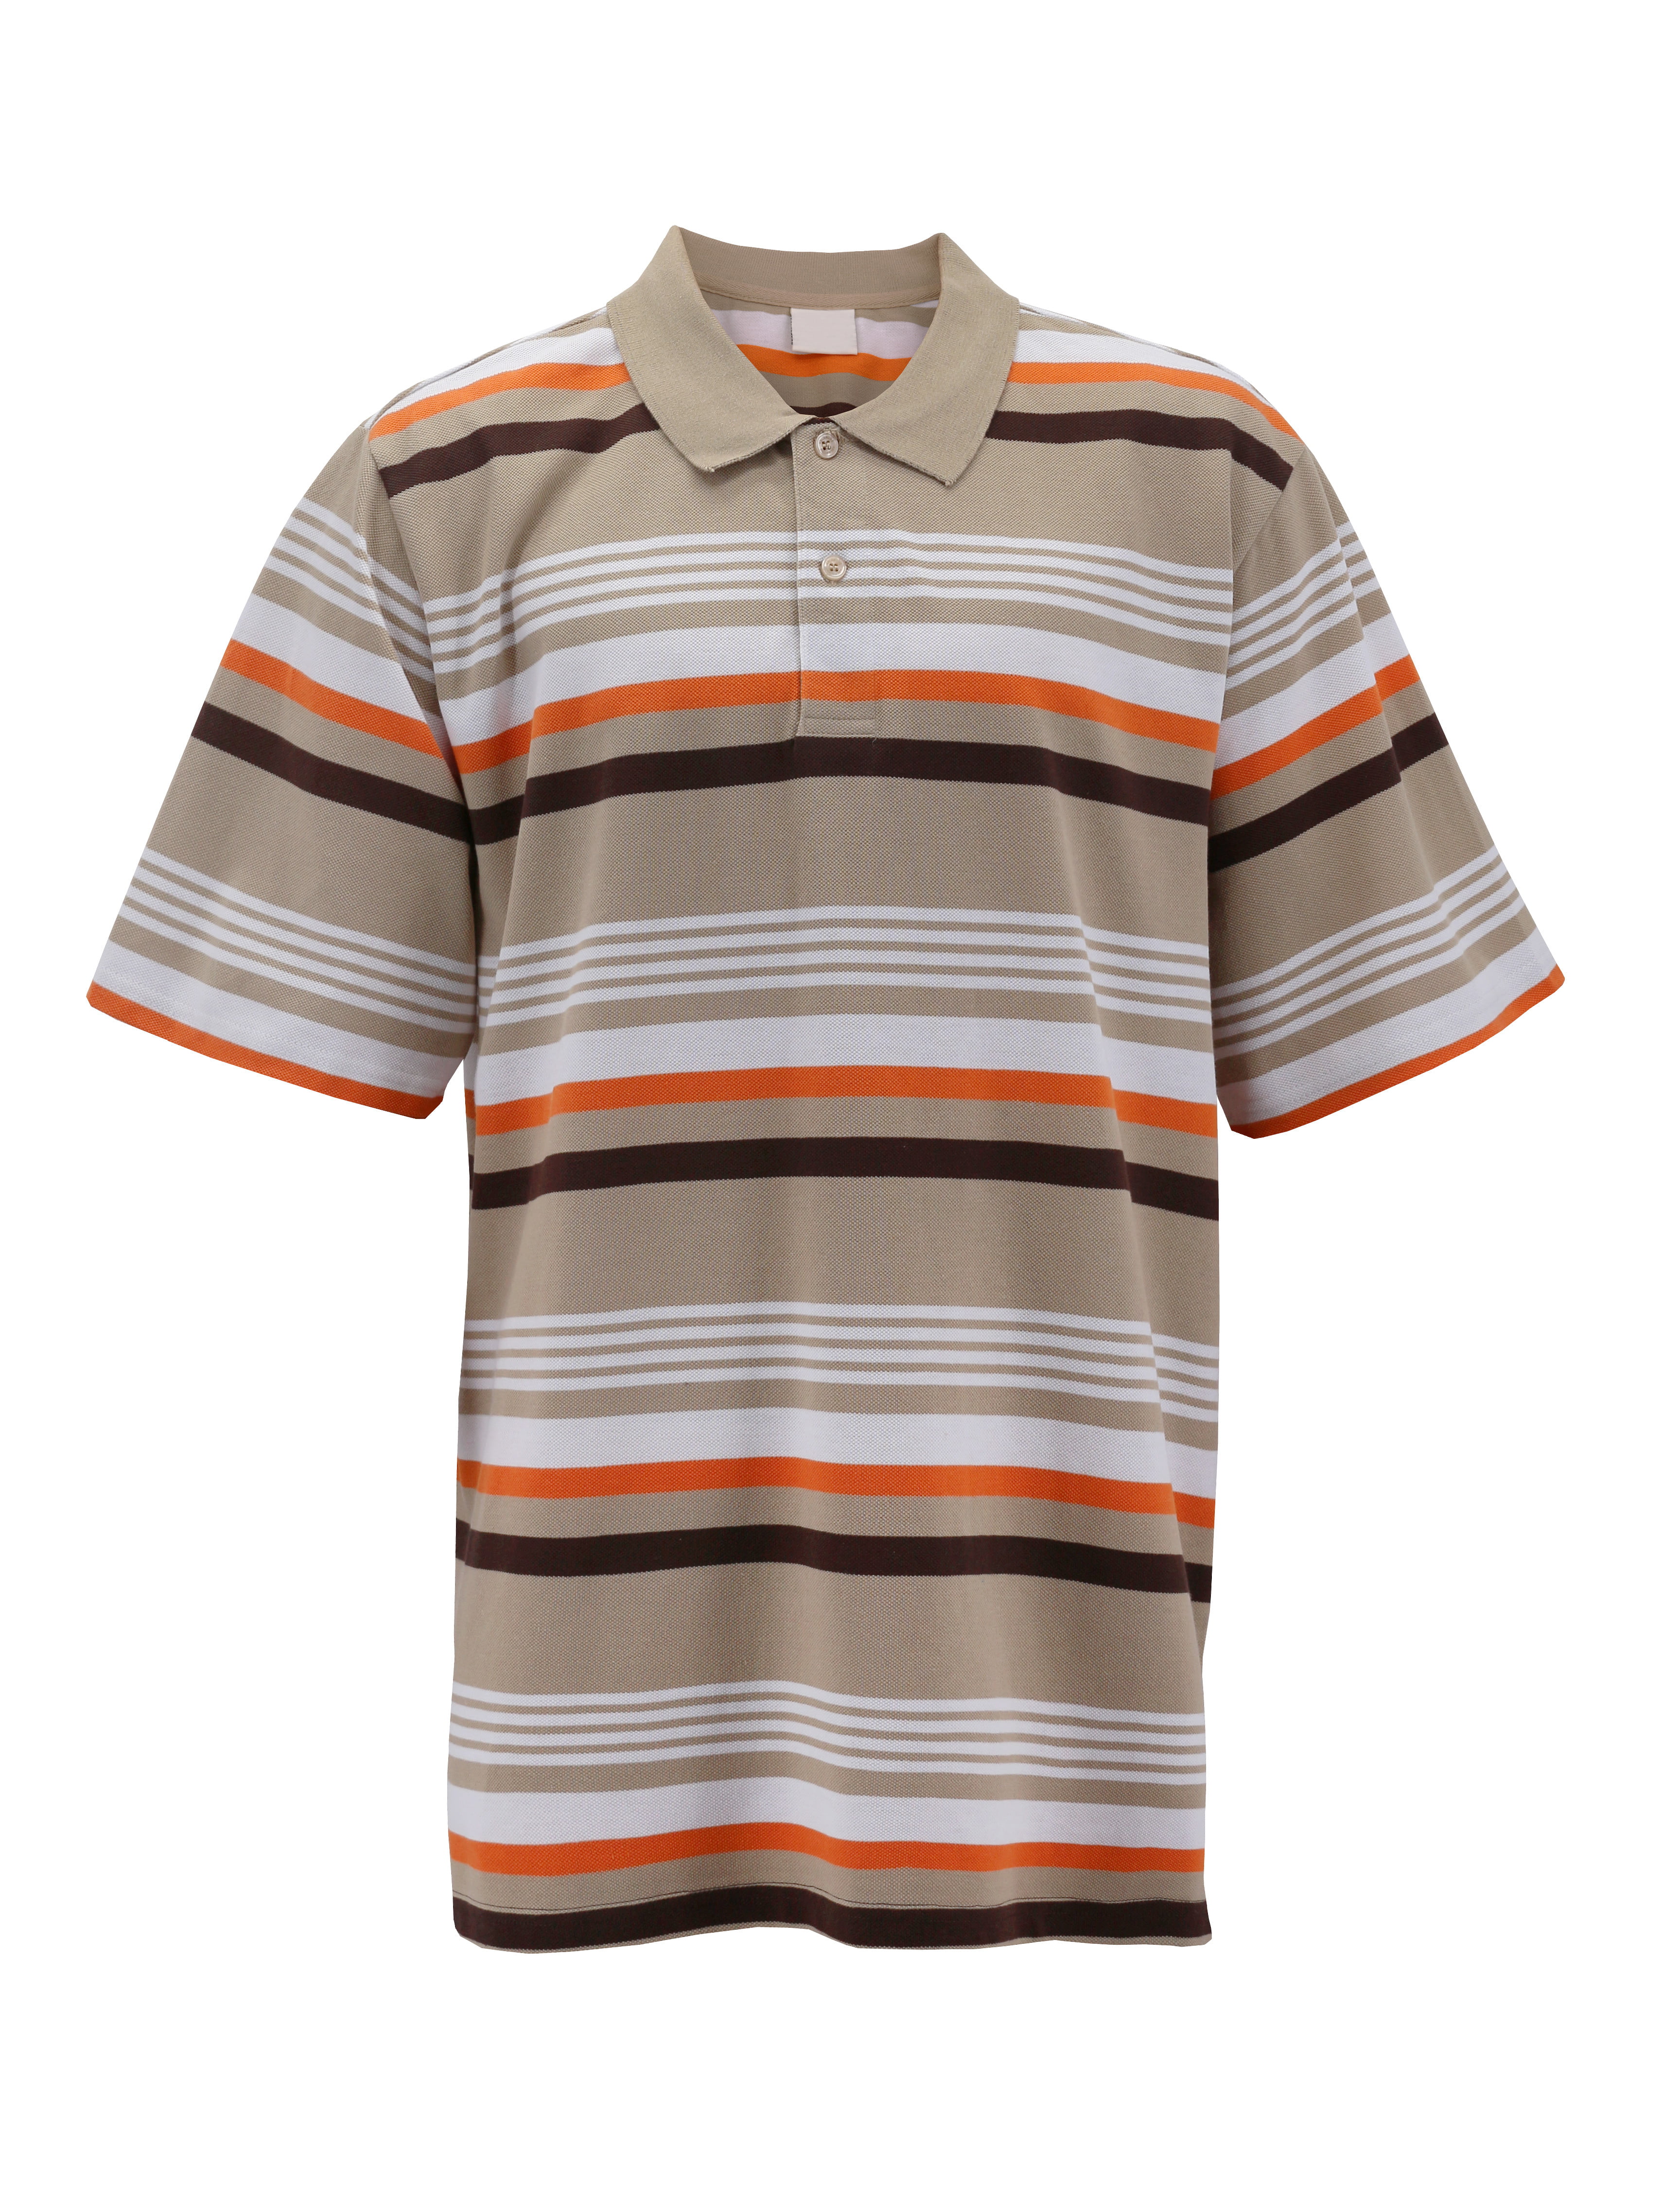 BRAND NEW MENS STRIPED POLO T SHIRT SHORT SLEEVE REGULAR FIT CASUAL SIZE S-3XL